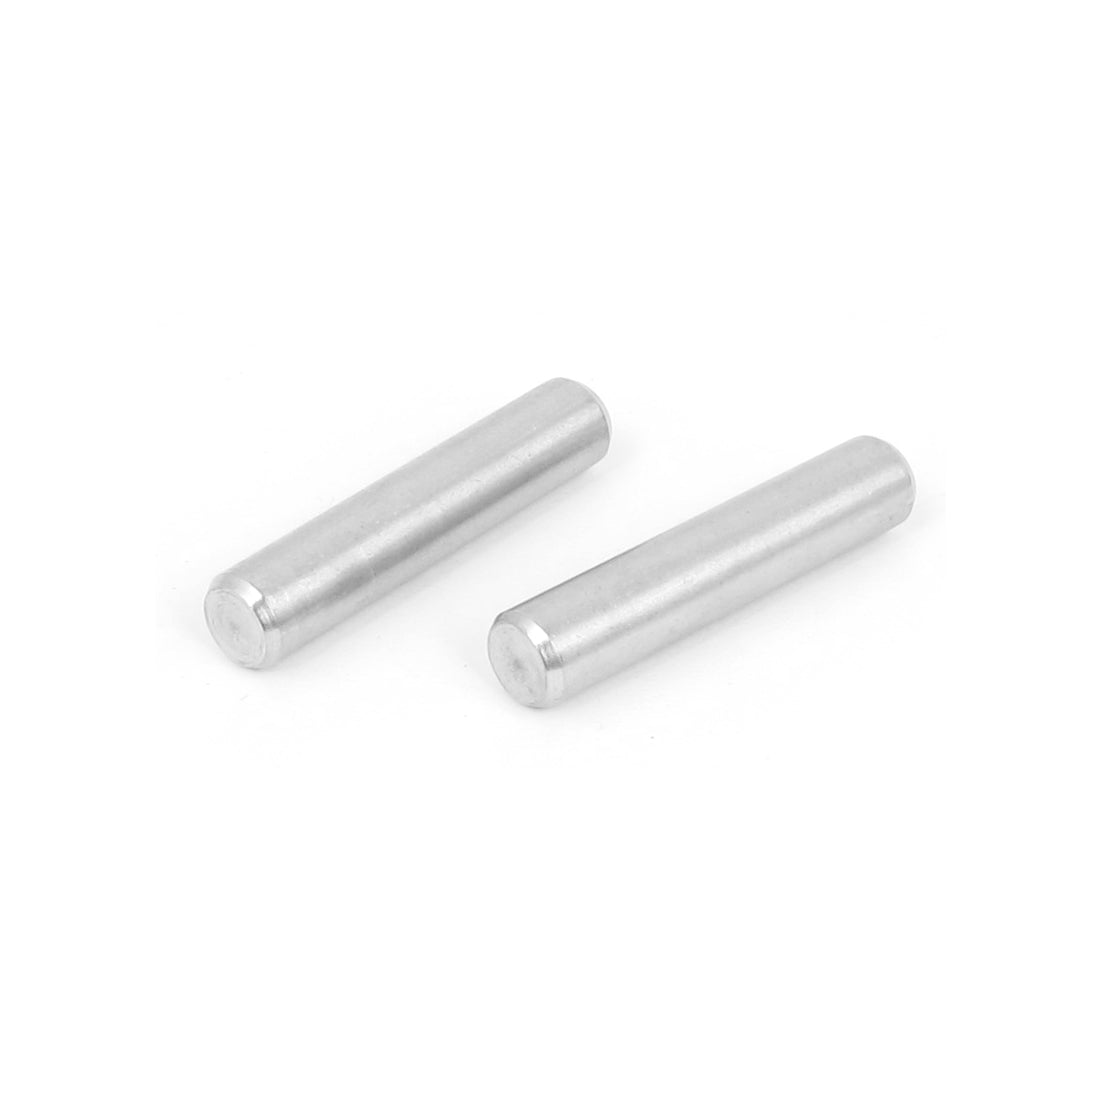 uxcell Uxcell 8mm x 40mm 304 Stainless Steel Dowel Pins Fasten Elements Silver Tone 5pcs